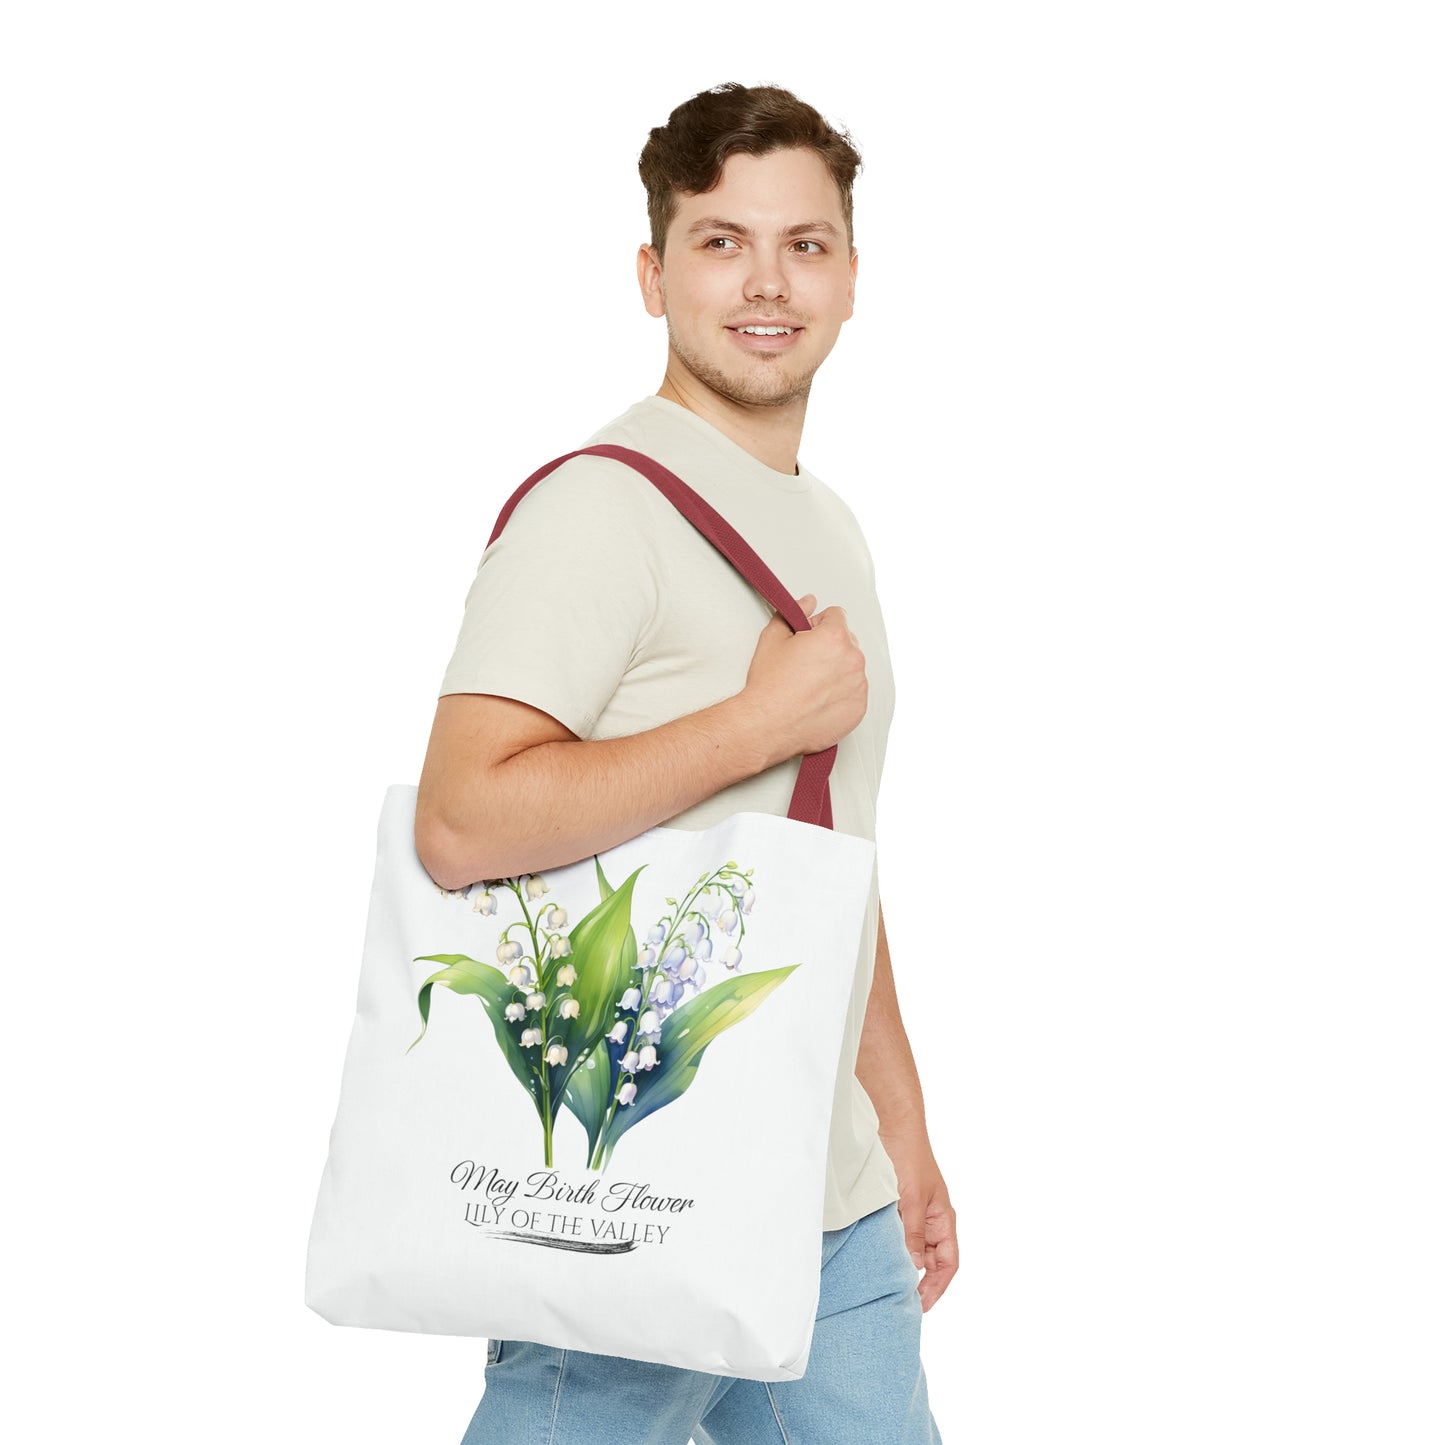 May Birth Flower: Lily of the valley - Tote Bag (AOP)